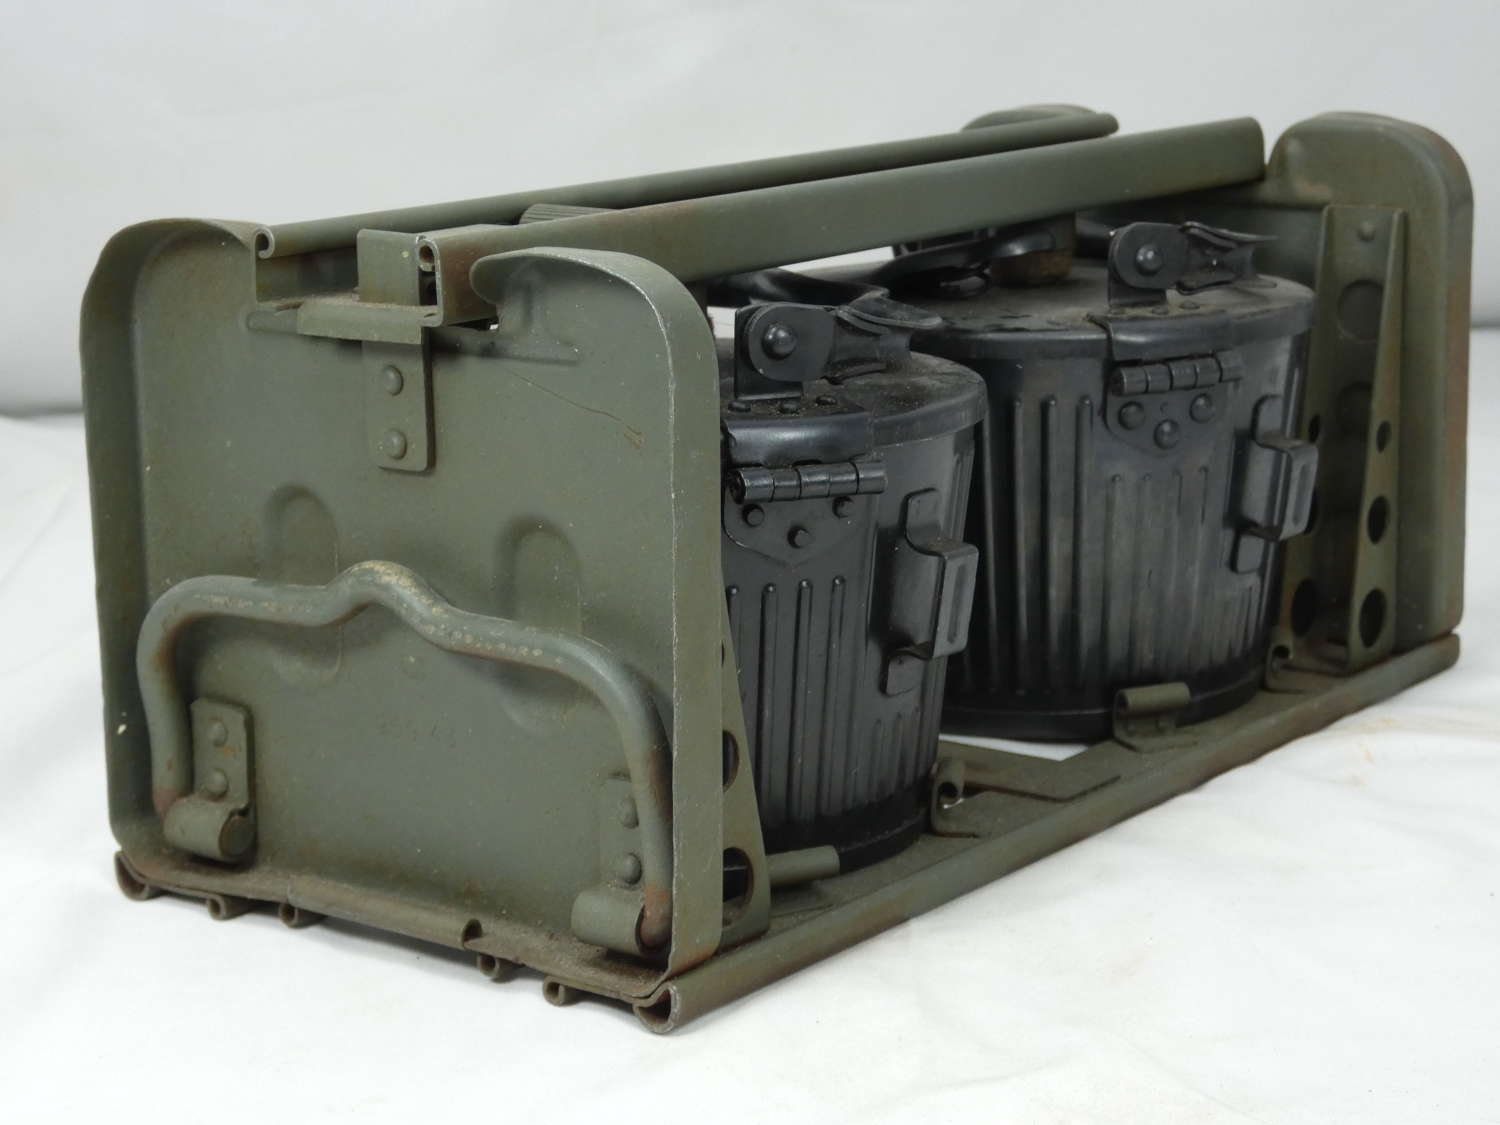 WW2 German MG34/MG42 Drum Magazines And Carrier Dated 1942